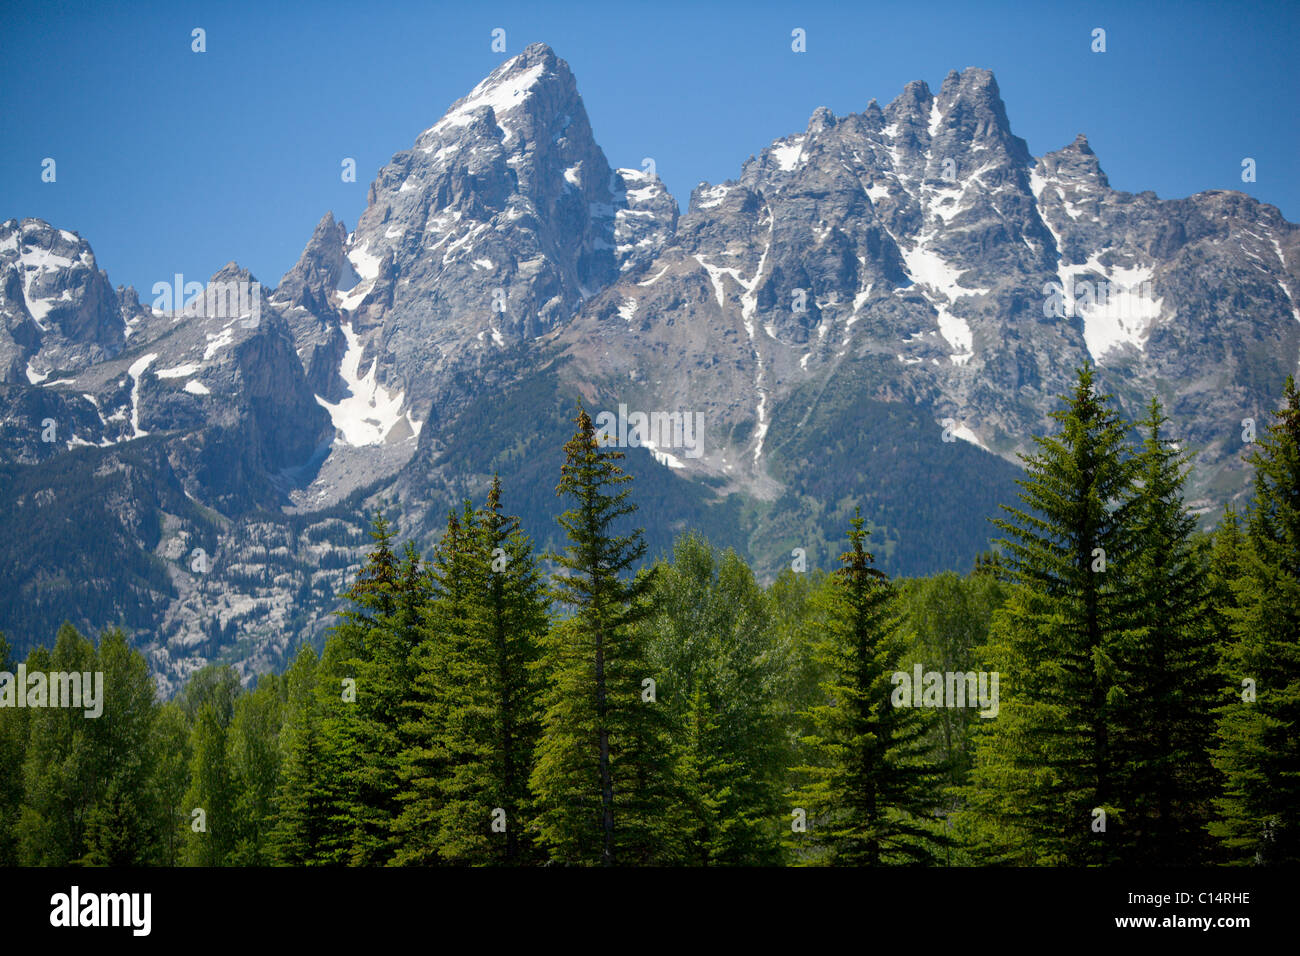 A view of the Grand Tetons towering above green fir trees with blue skies. Stock Photo